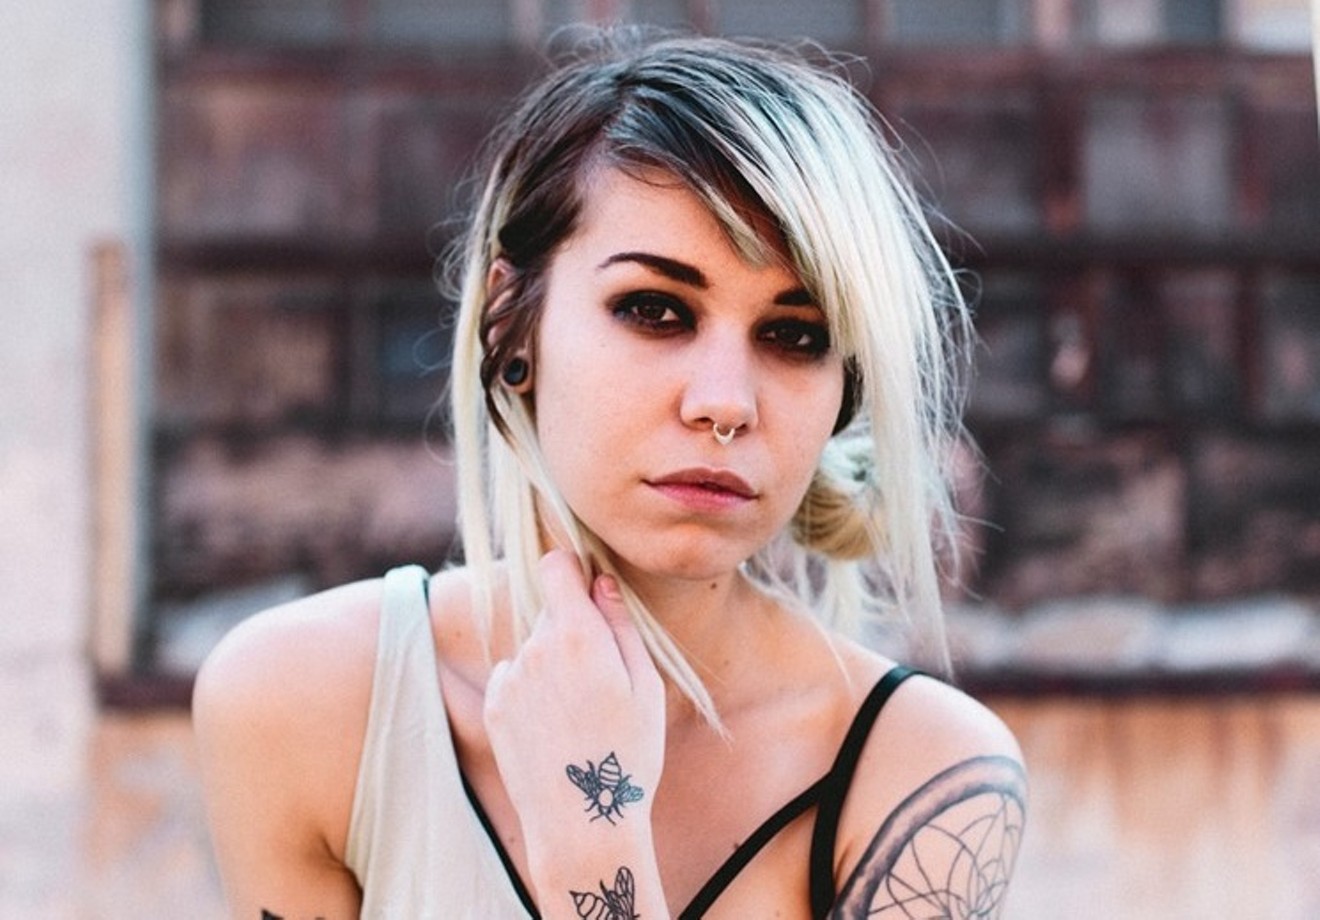 Mija is scheduled to perform on Saturday, March 10, at the Monarch Theatre.